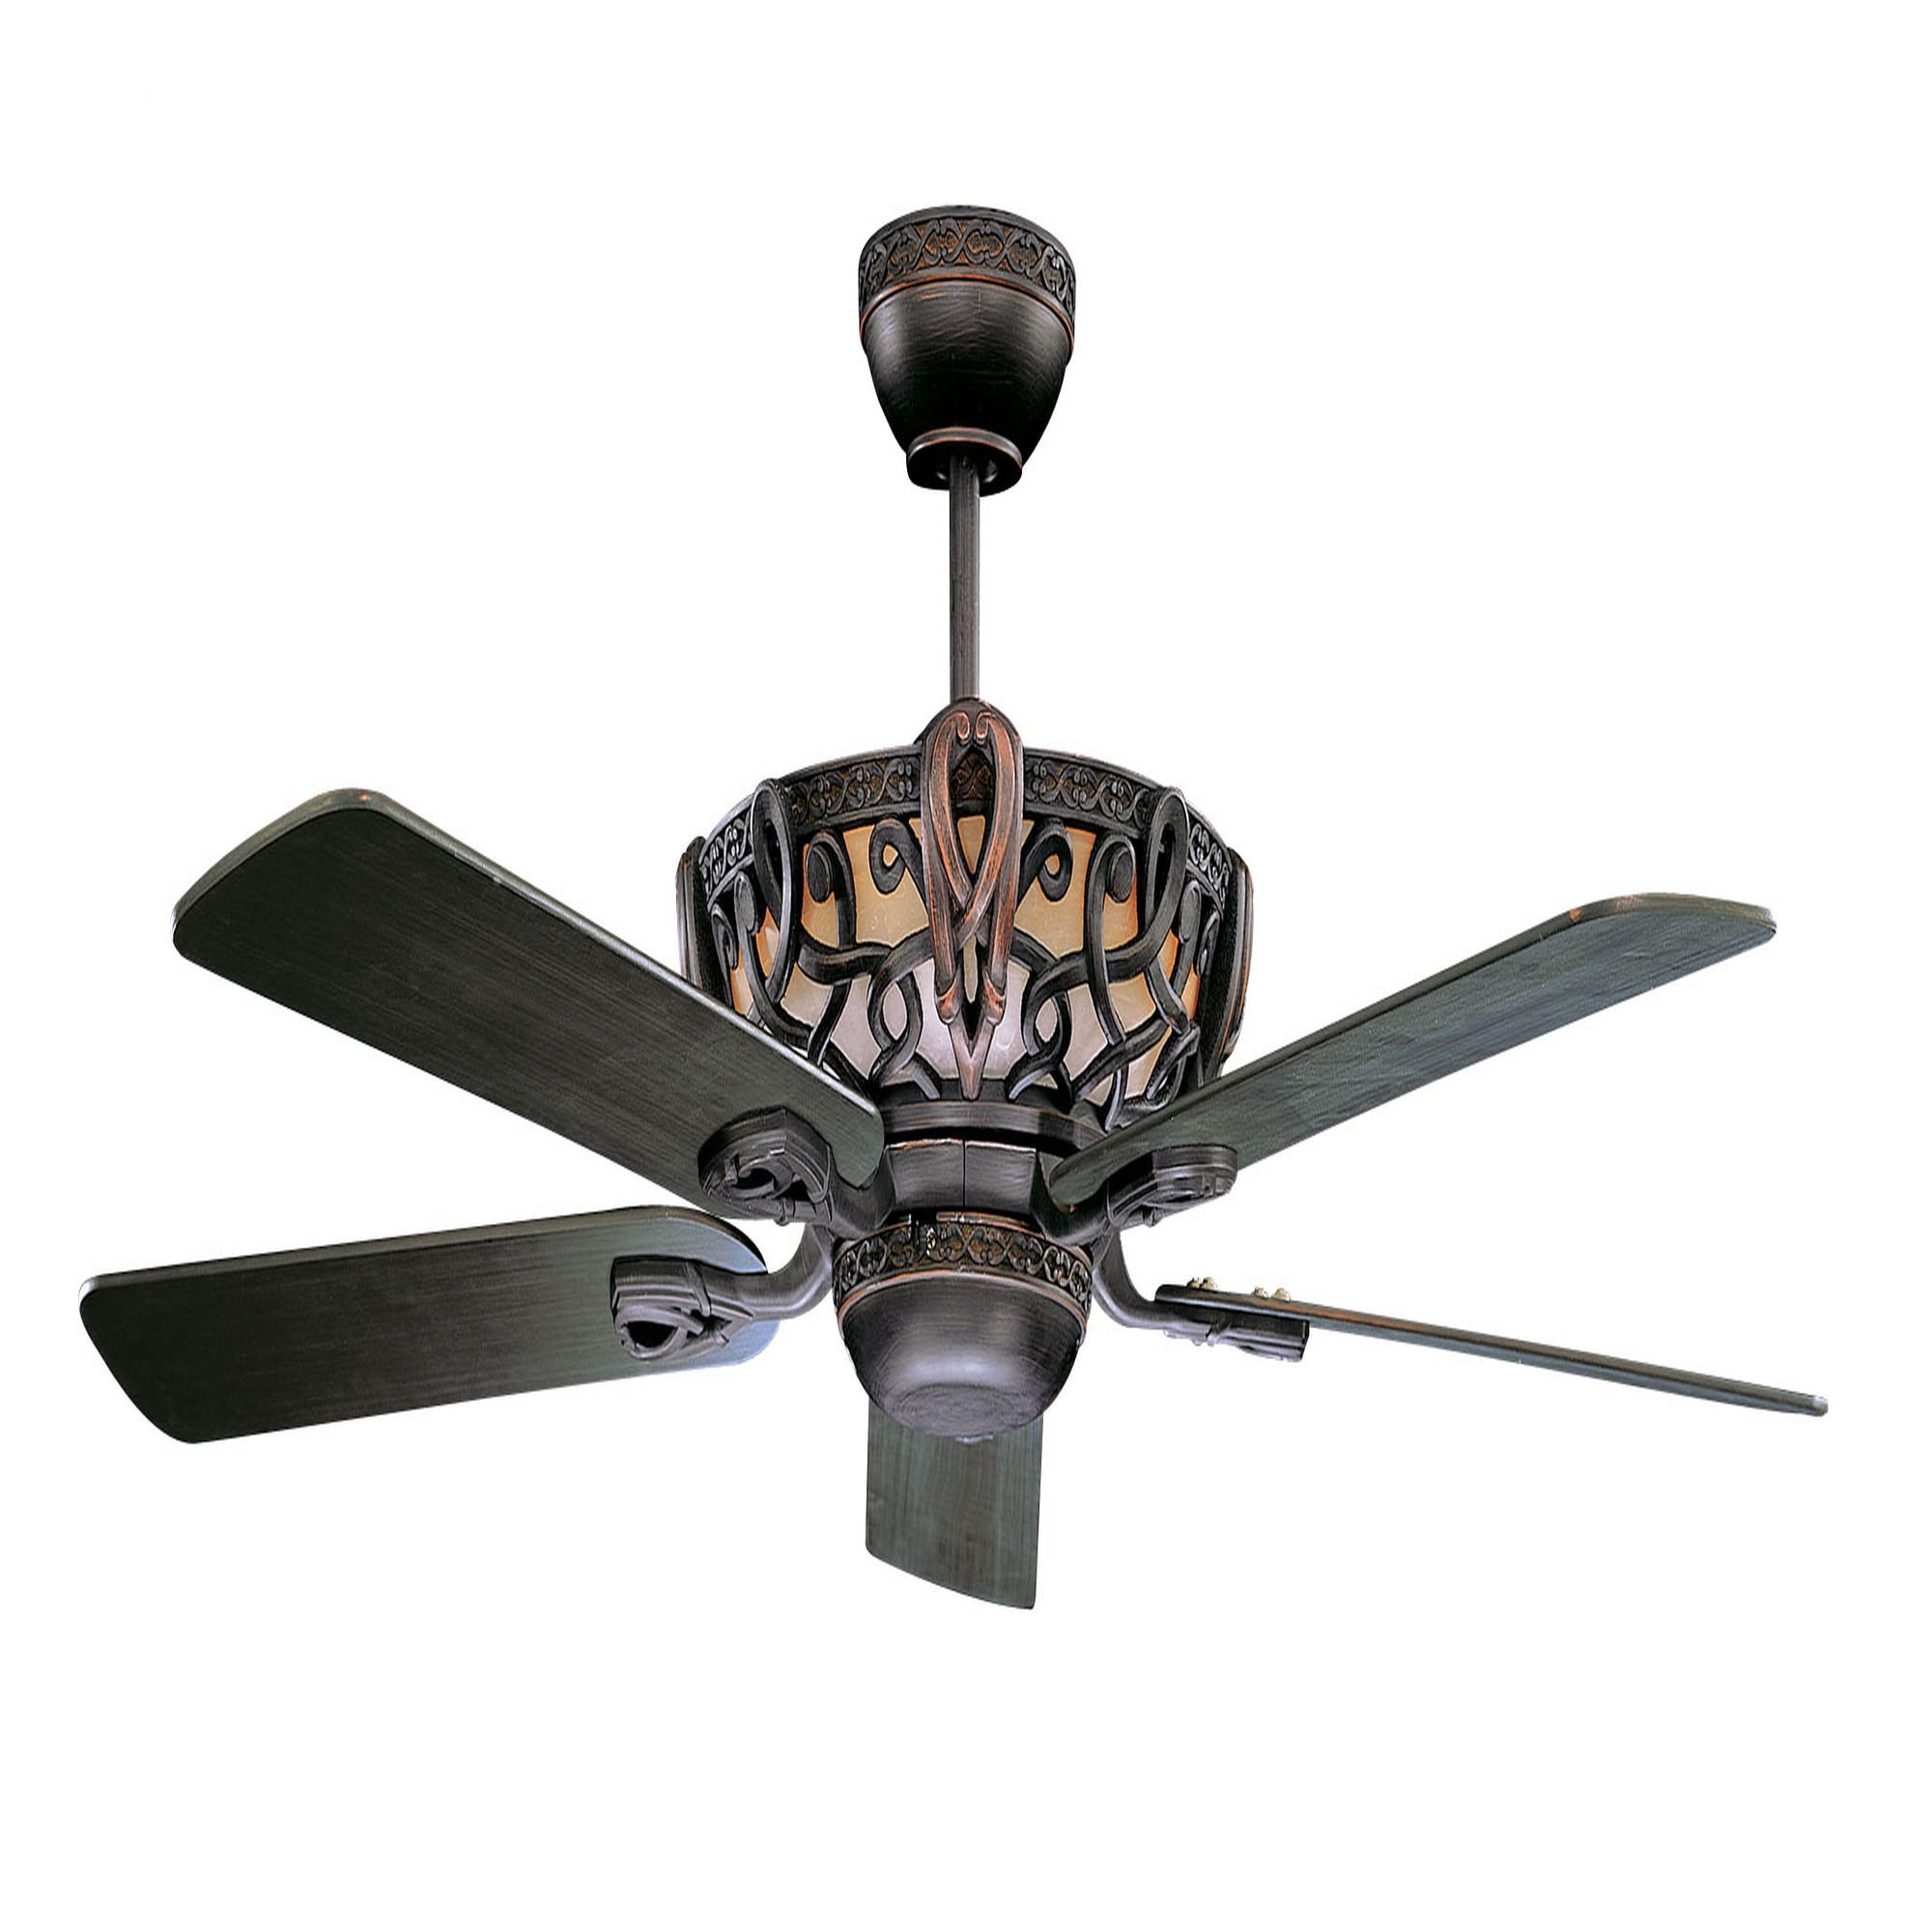 Outdoor Concord Fans 52" Aracruz 5 Blade Ceiling Fan With Regard To Widely Used Lazlo 3 Blade Ceiling Fans With Remote (View 19 of 20)